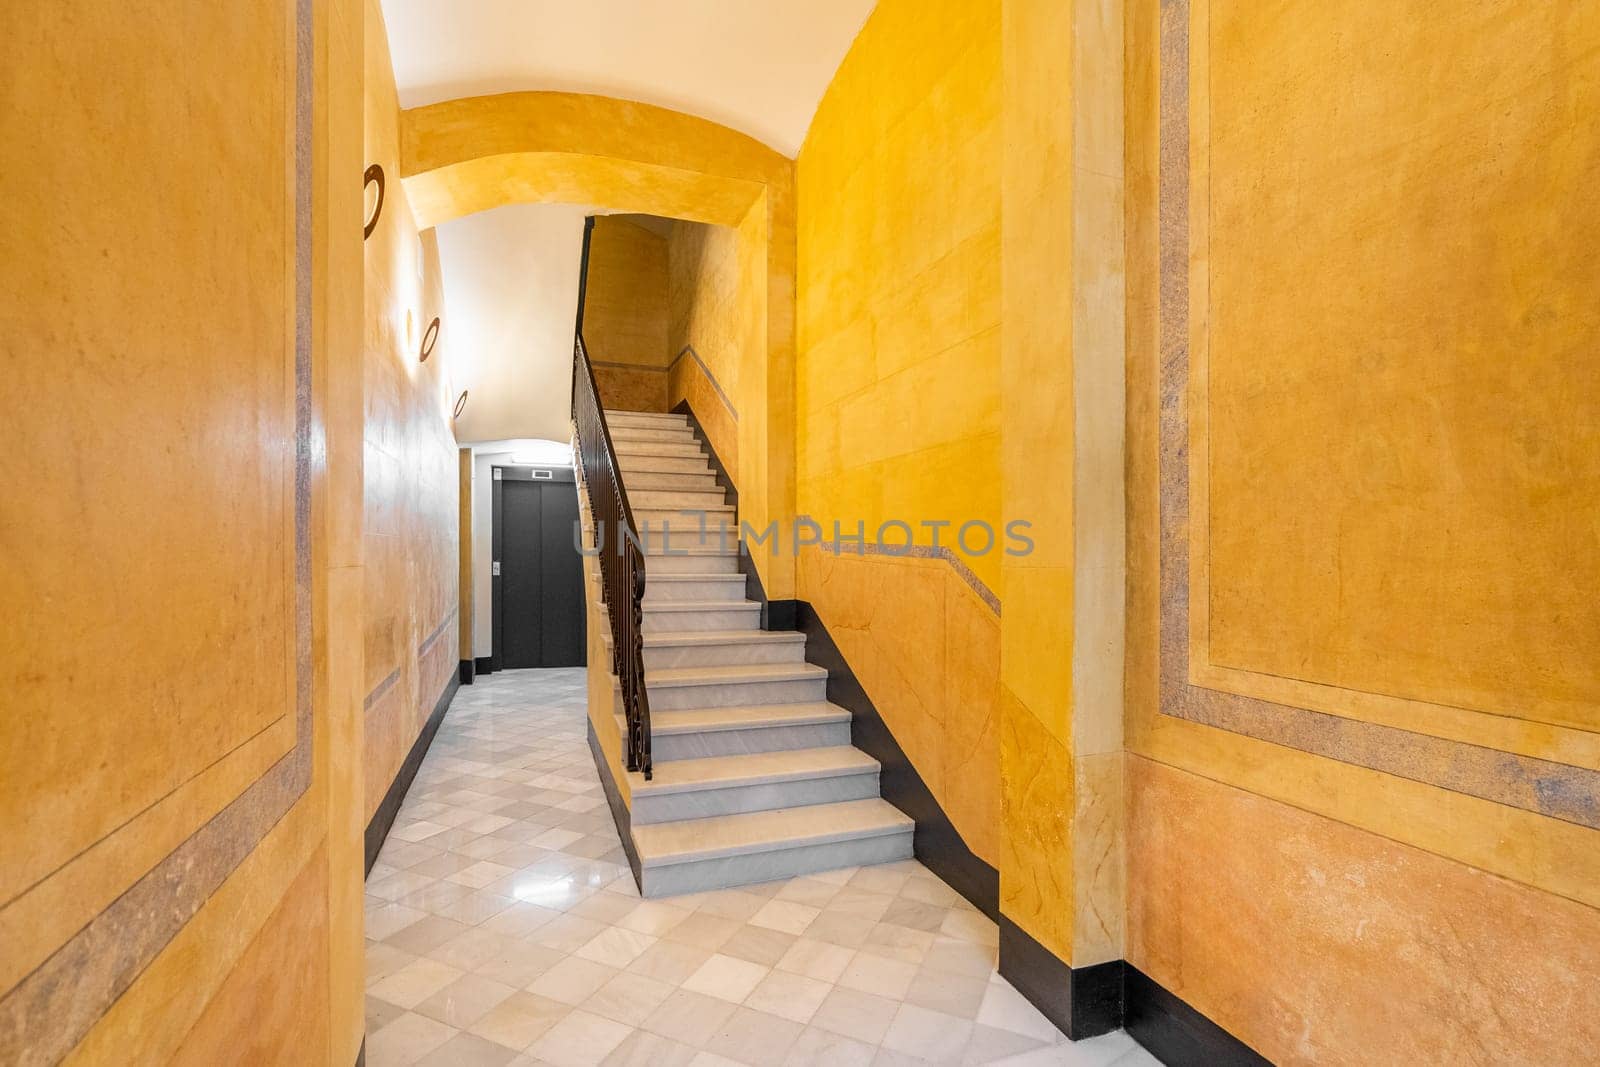 Stairs in yellow-walled hallway at entrance of dwelling building. Striking design solution for hotel renovation. Place to rest on vacation